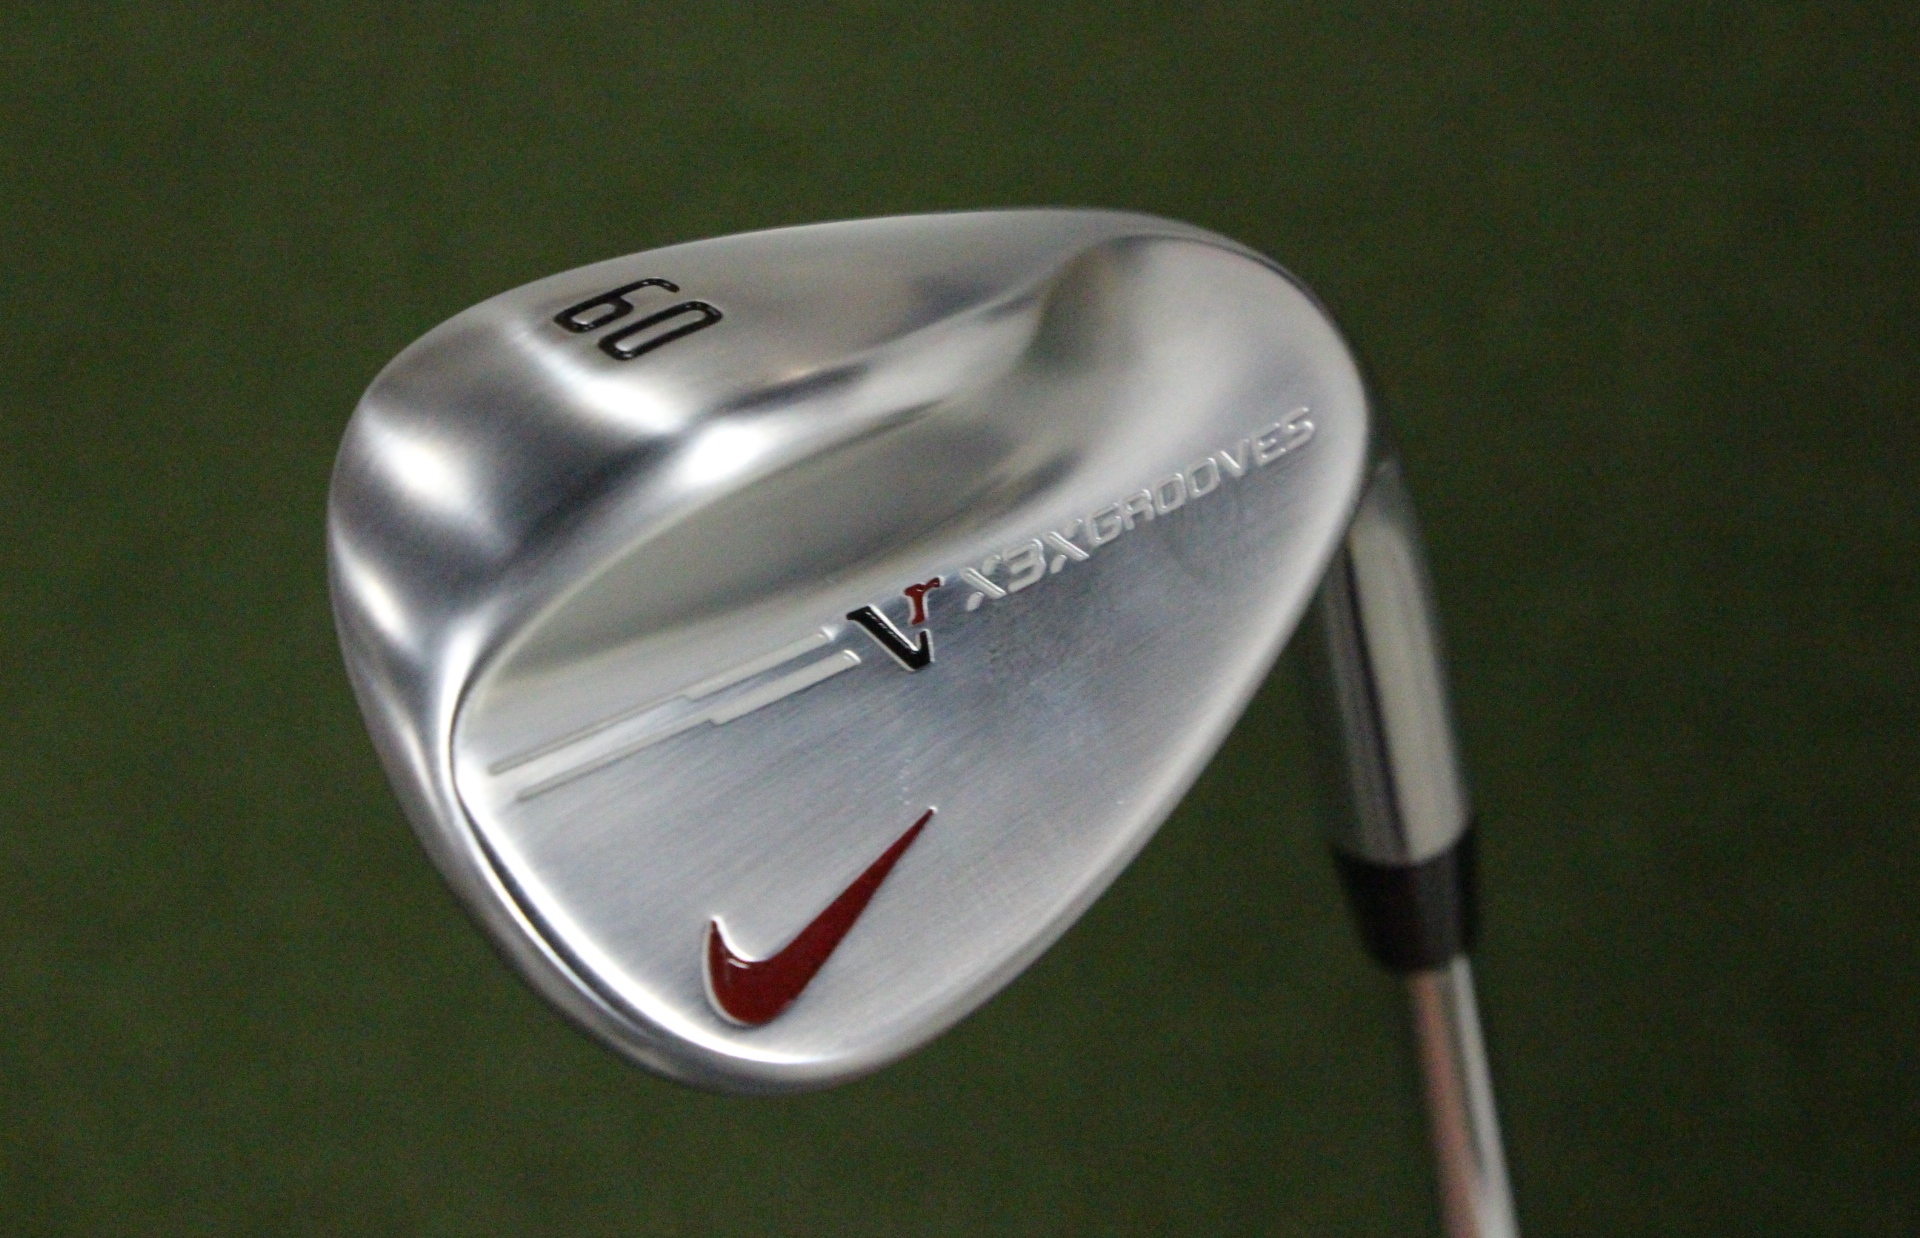 met tijd rouw rit Review: Nike VR X3X Dual Wide and Toe Sweep Wedges – GolfWRX